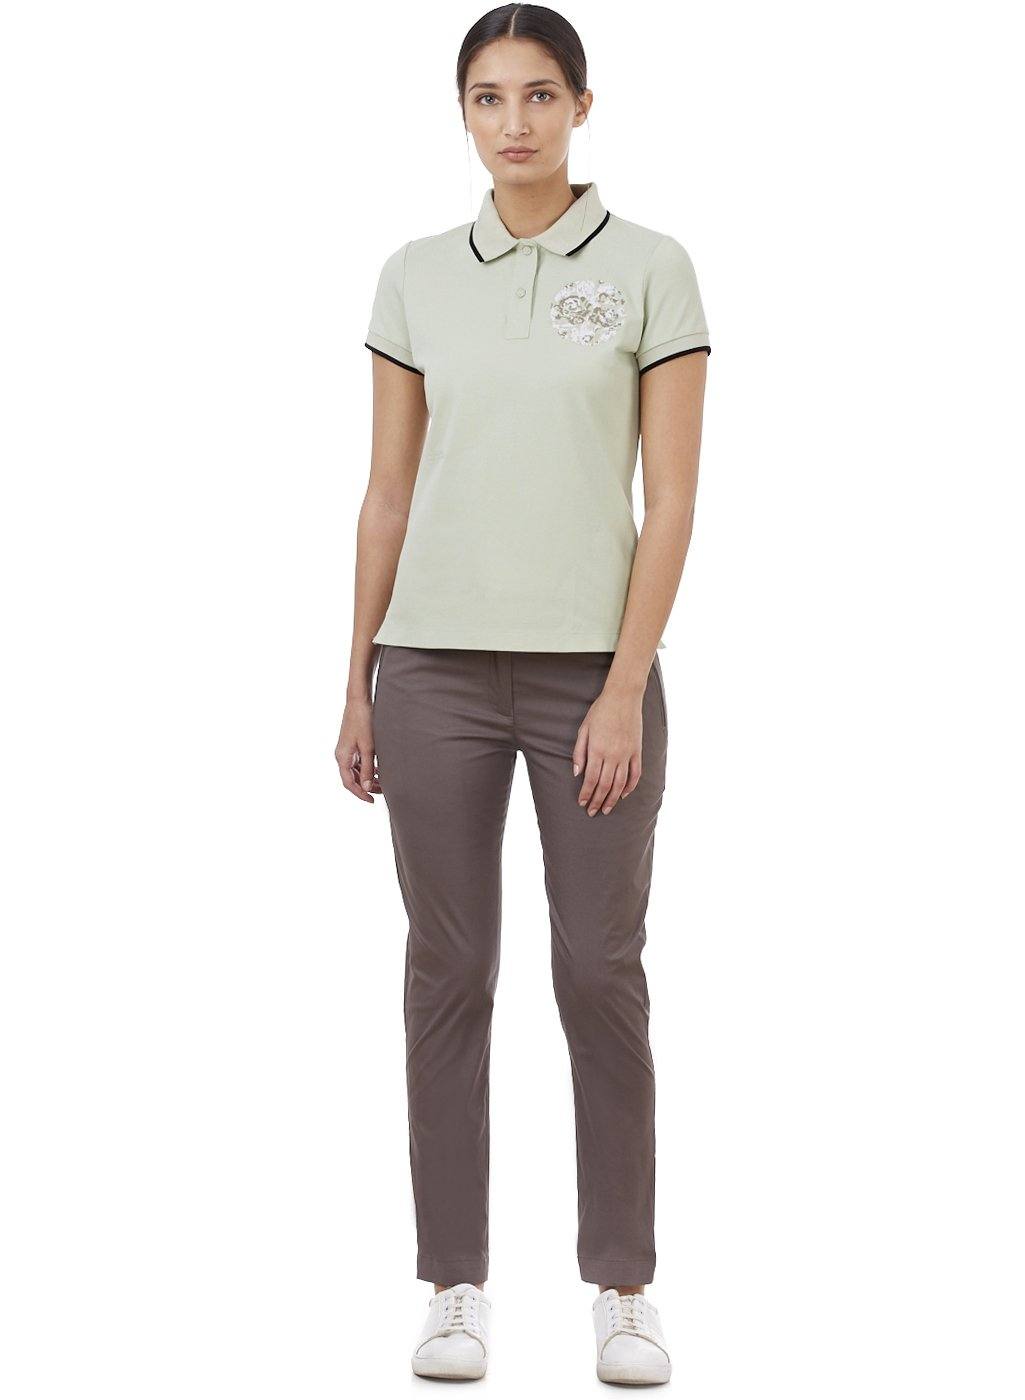 TESSA FLORAL EMBROIDERED POLO SHIRT - Genes online store 2020